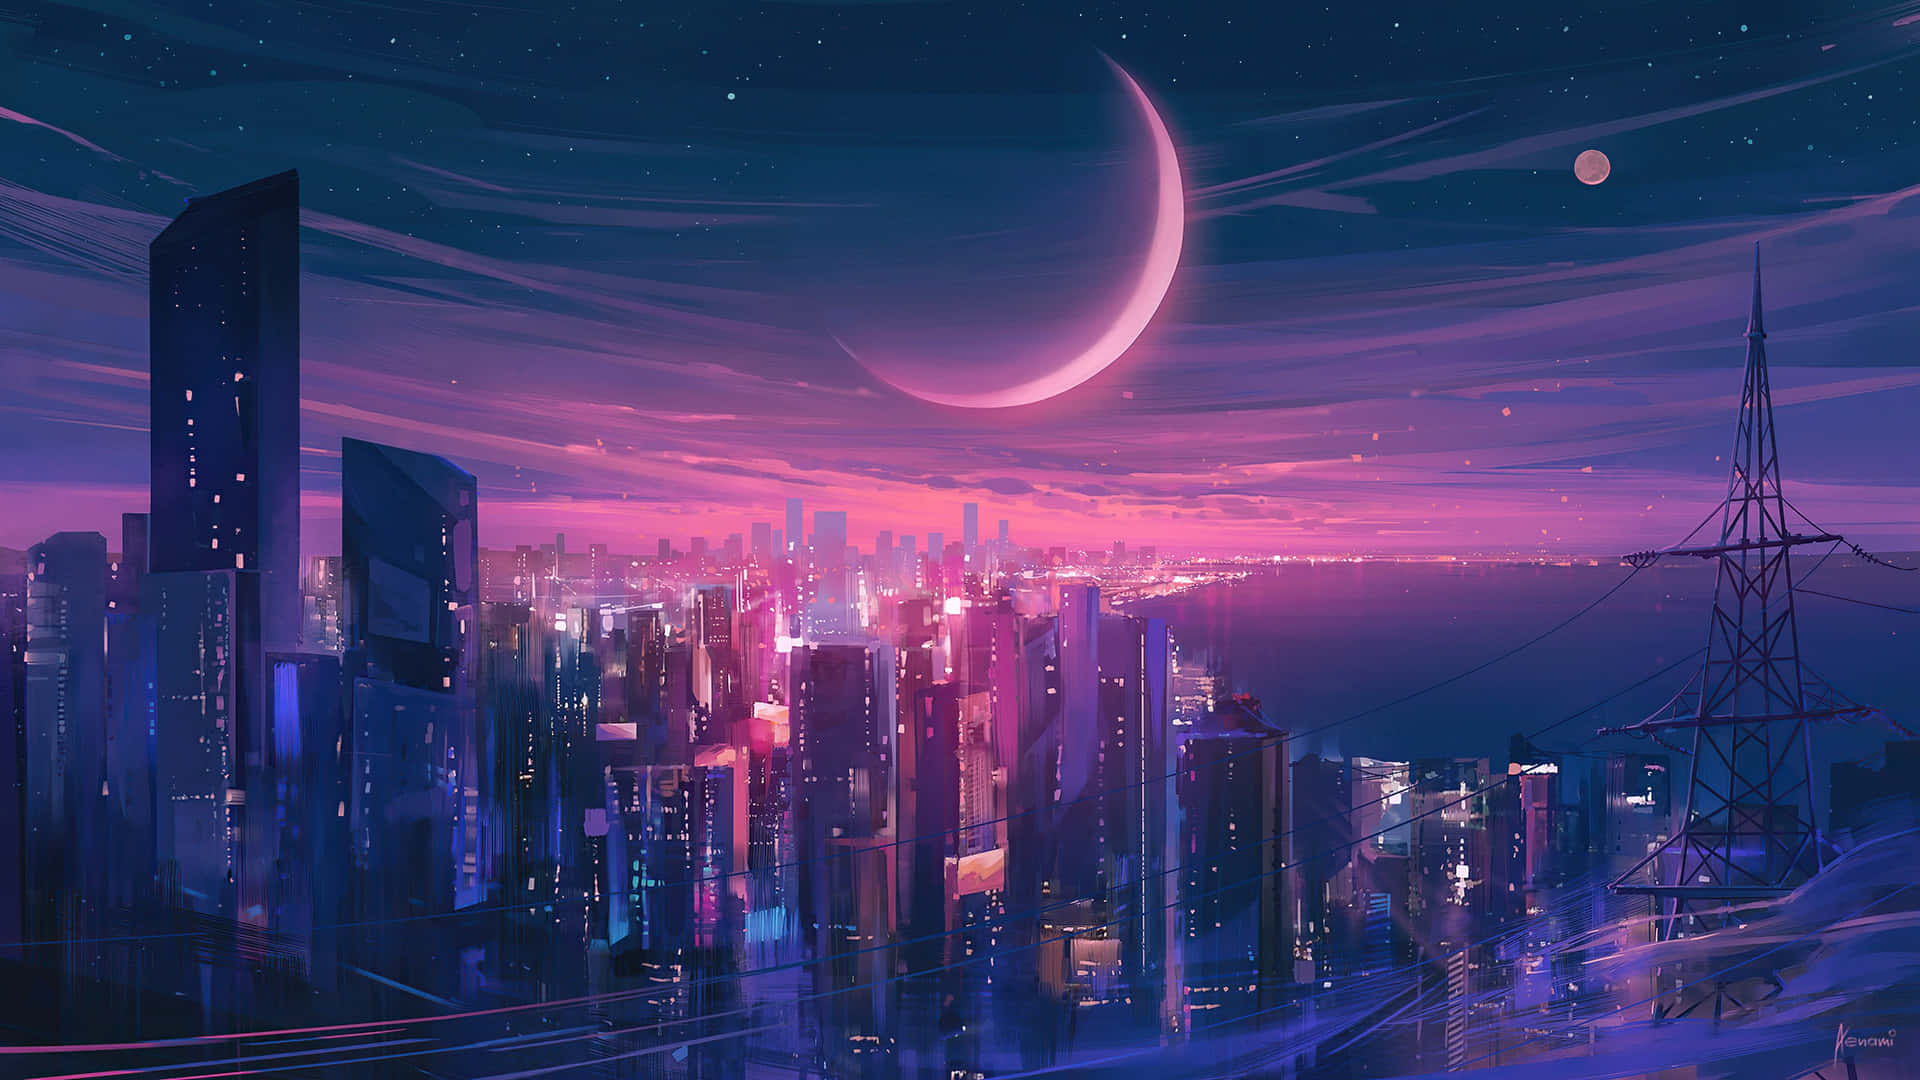 Dive into the retro-futurism of Synthwave City Wallpaper